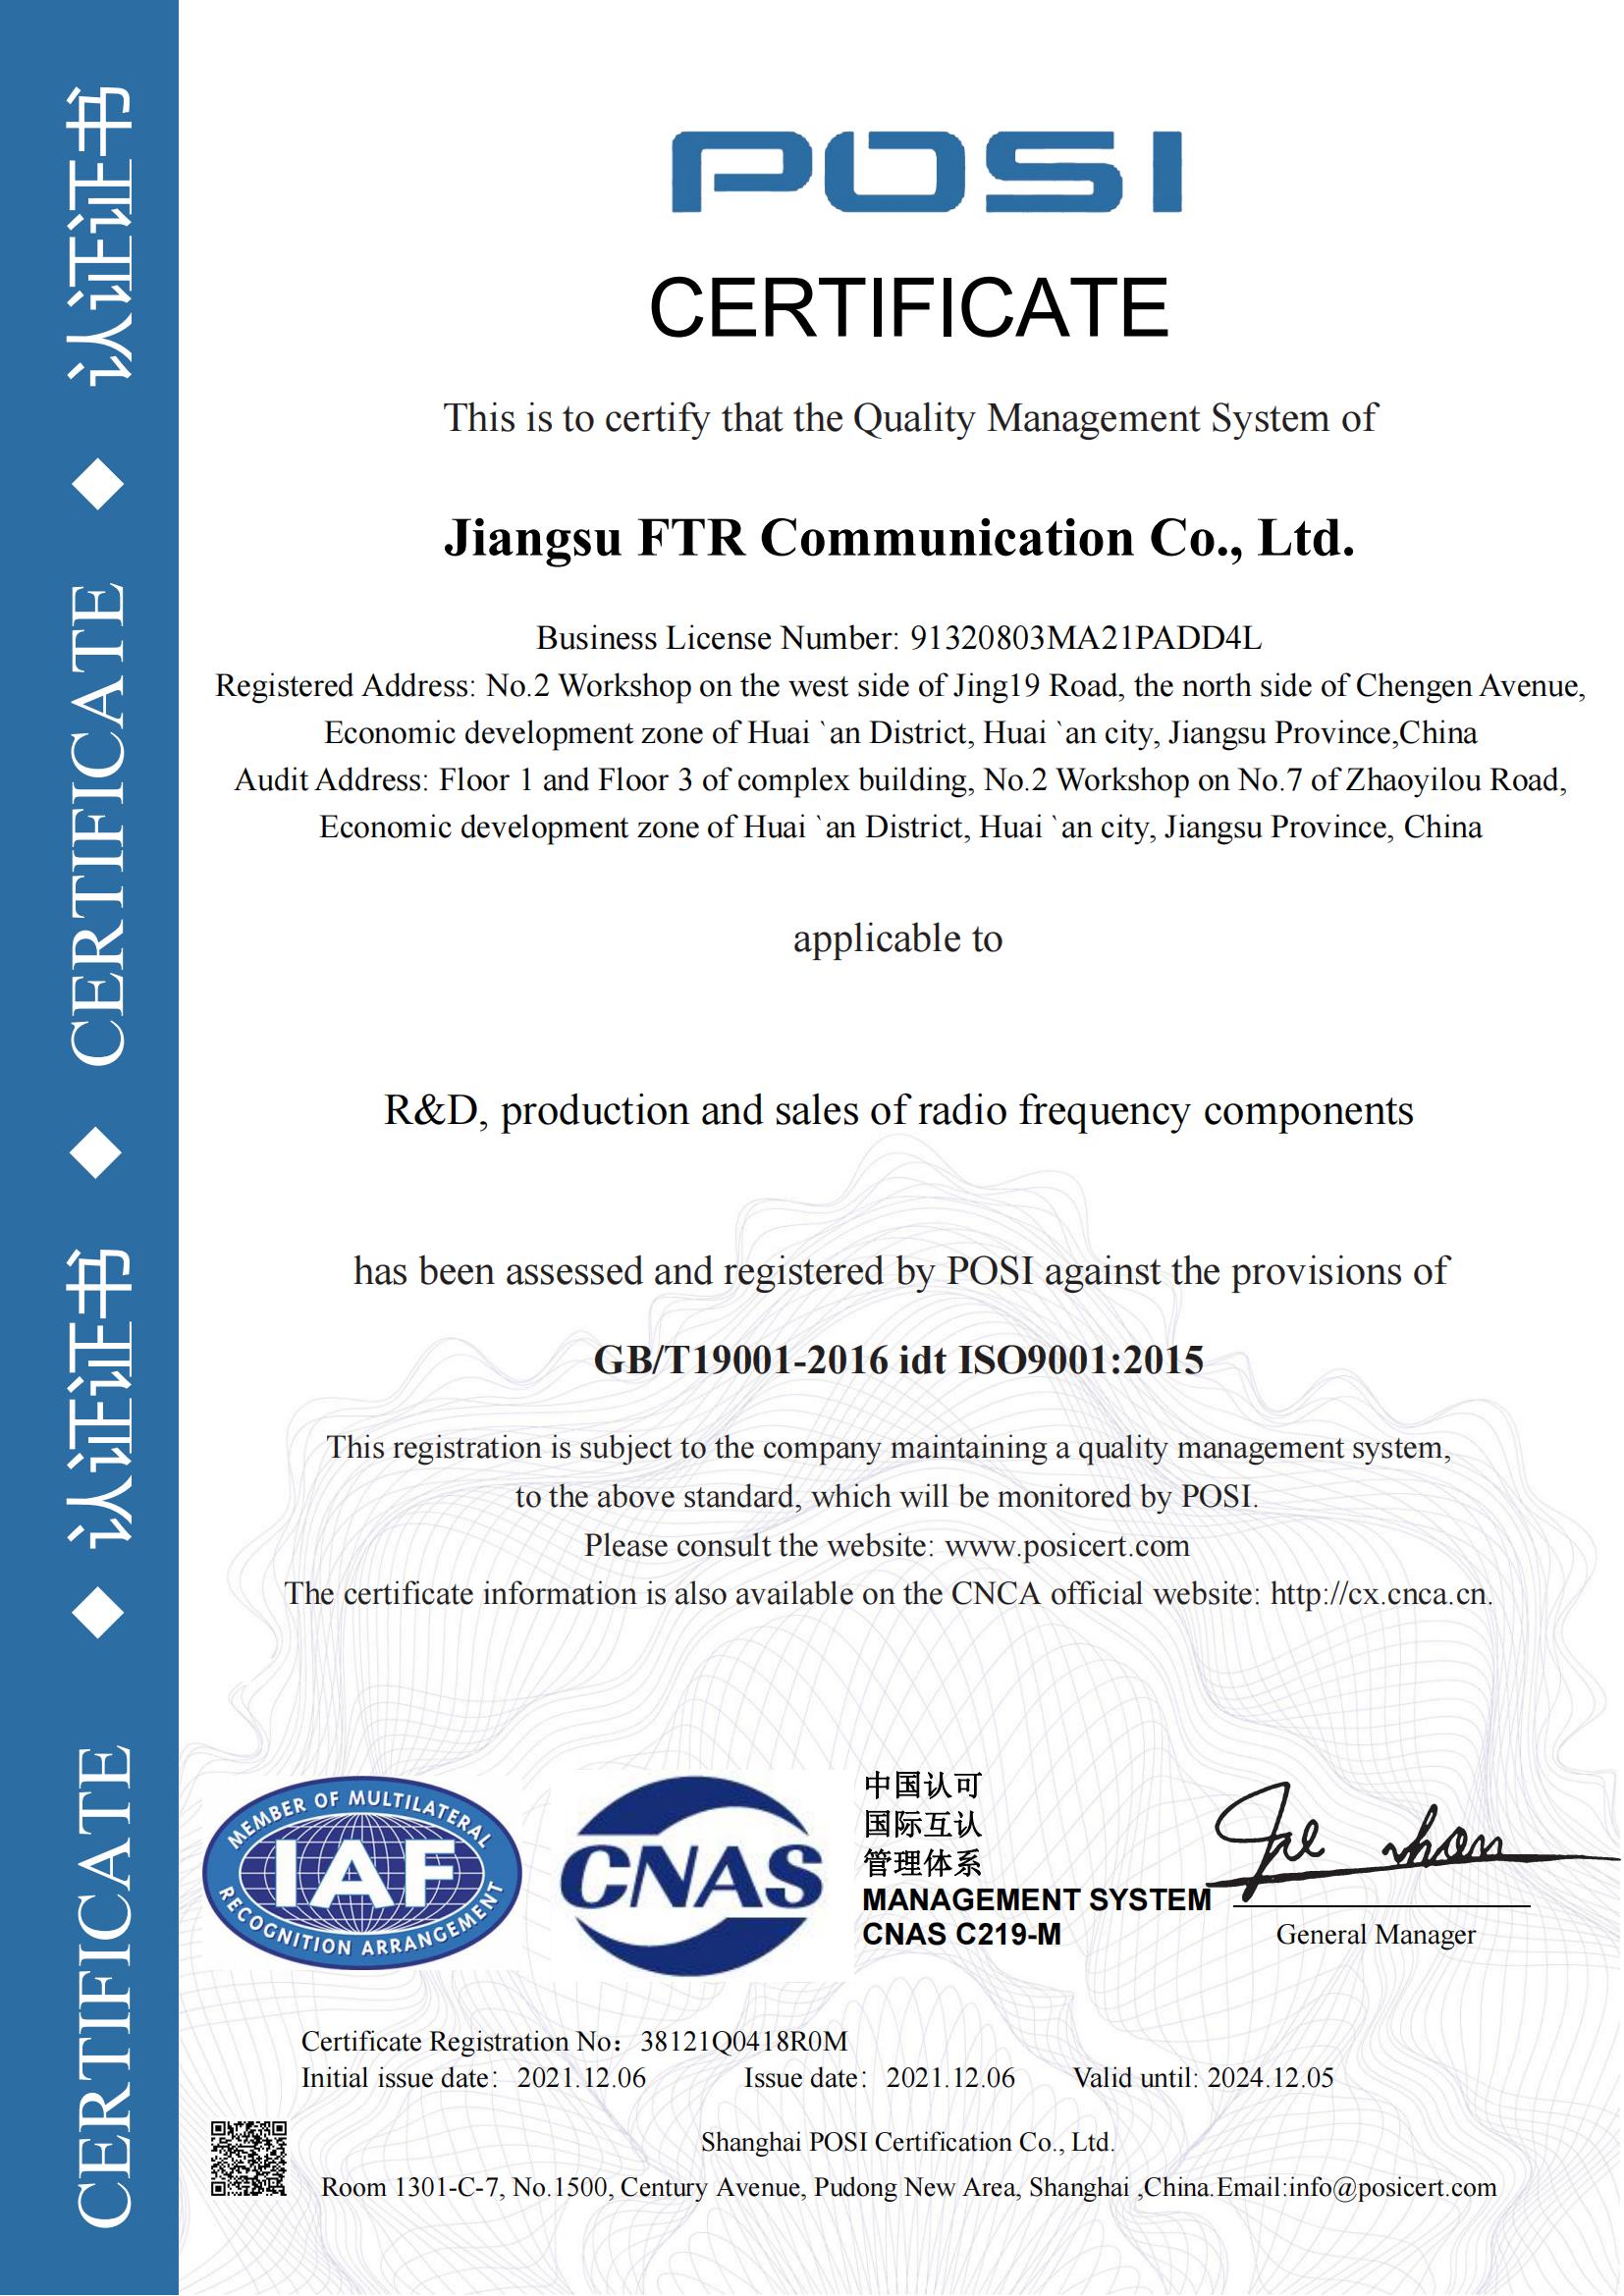 Our company passed ISO9001 certification in November 2021